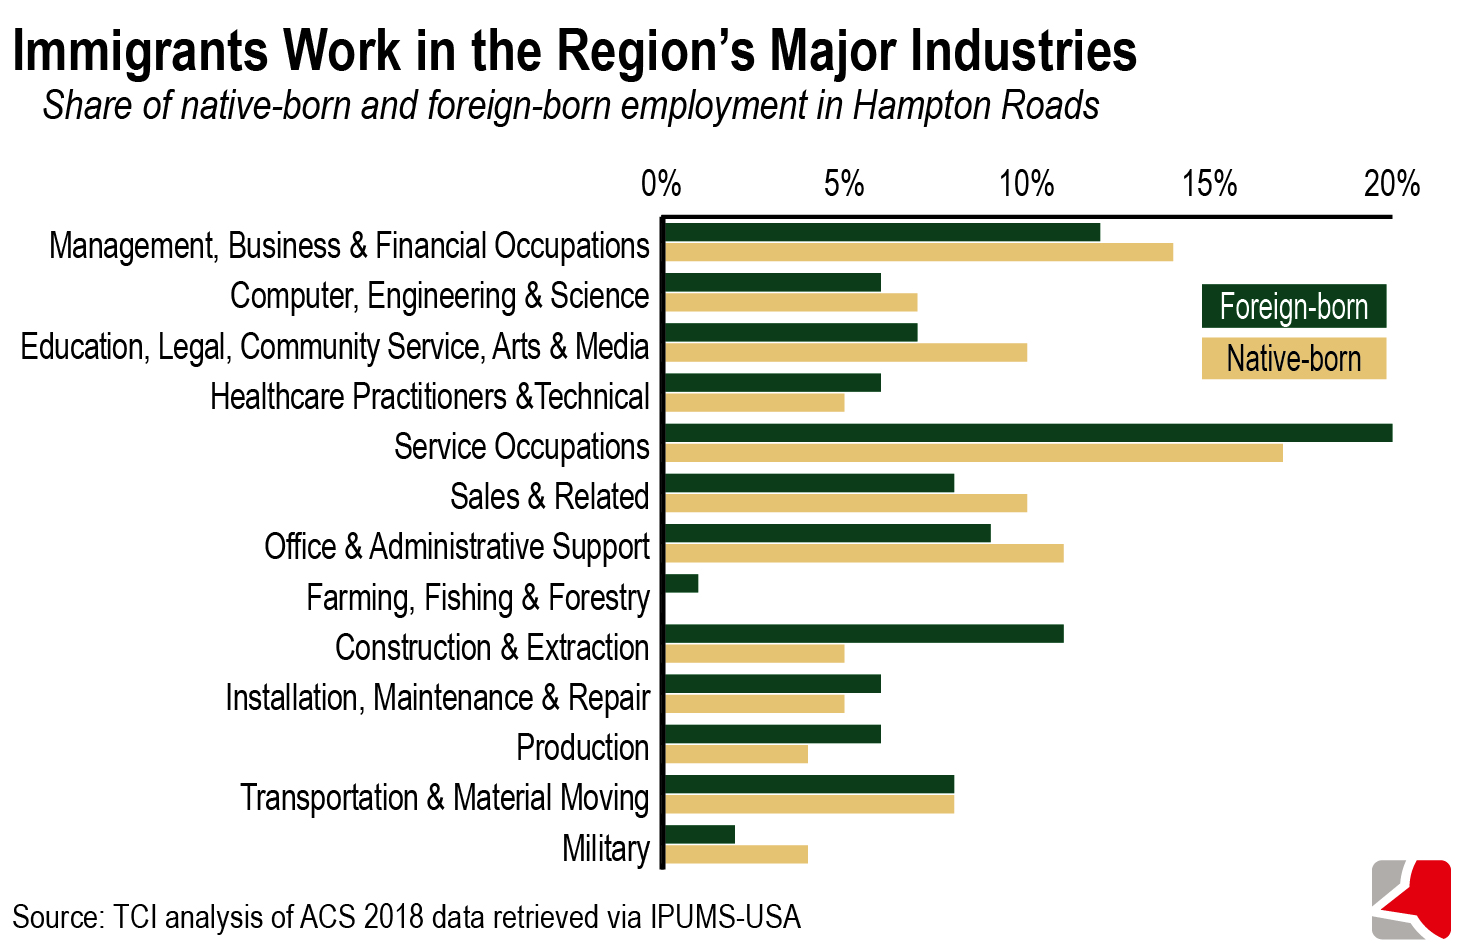 Bar growing showing the share of native-born and foreign-born employment by sector in Hampton Roads. Following service occupations, 12% of foreign-born immigrants work in management, business, and financial occupations, 11% in construction and 9% in office and administrative support, based on analysis of ACS 2018 data via IPUMS-USA